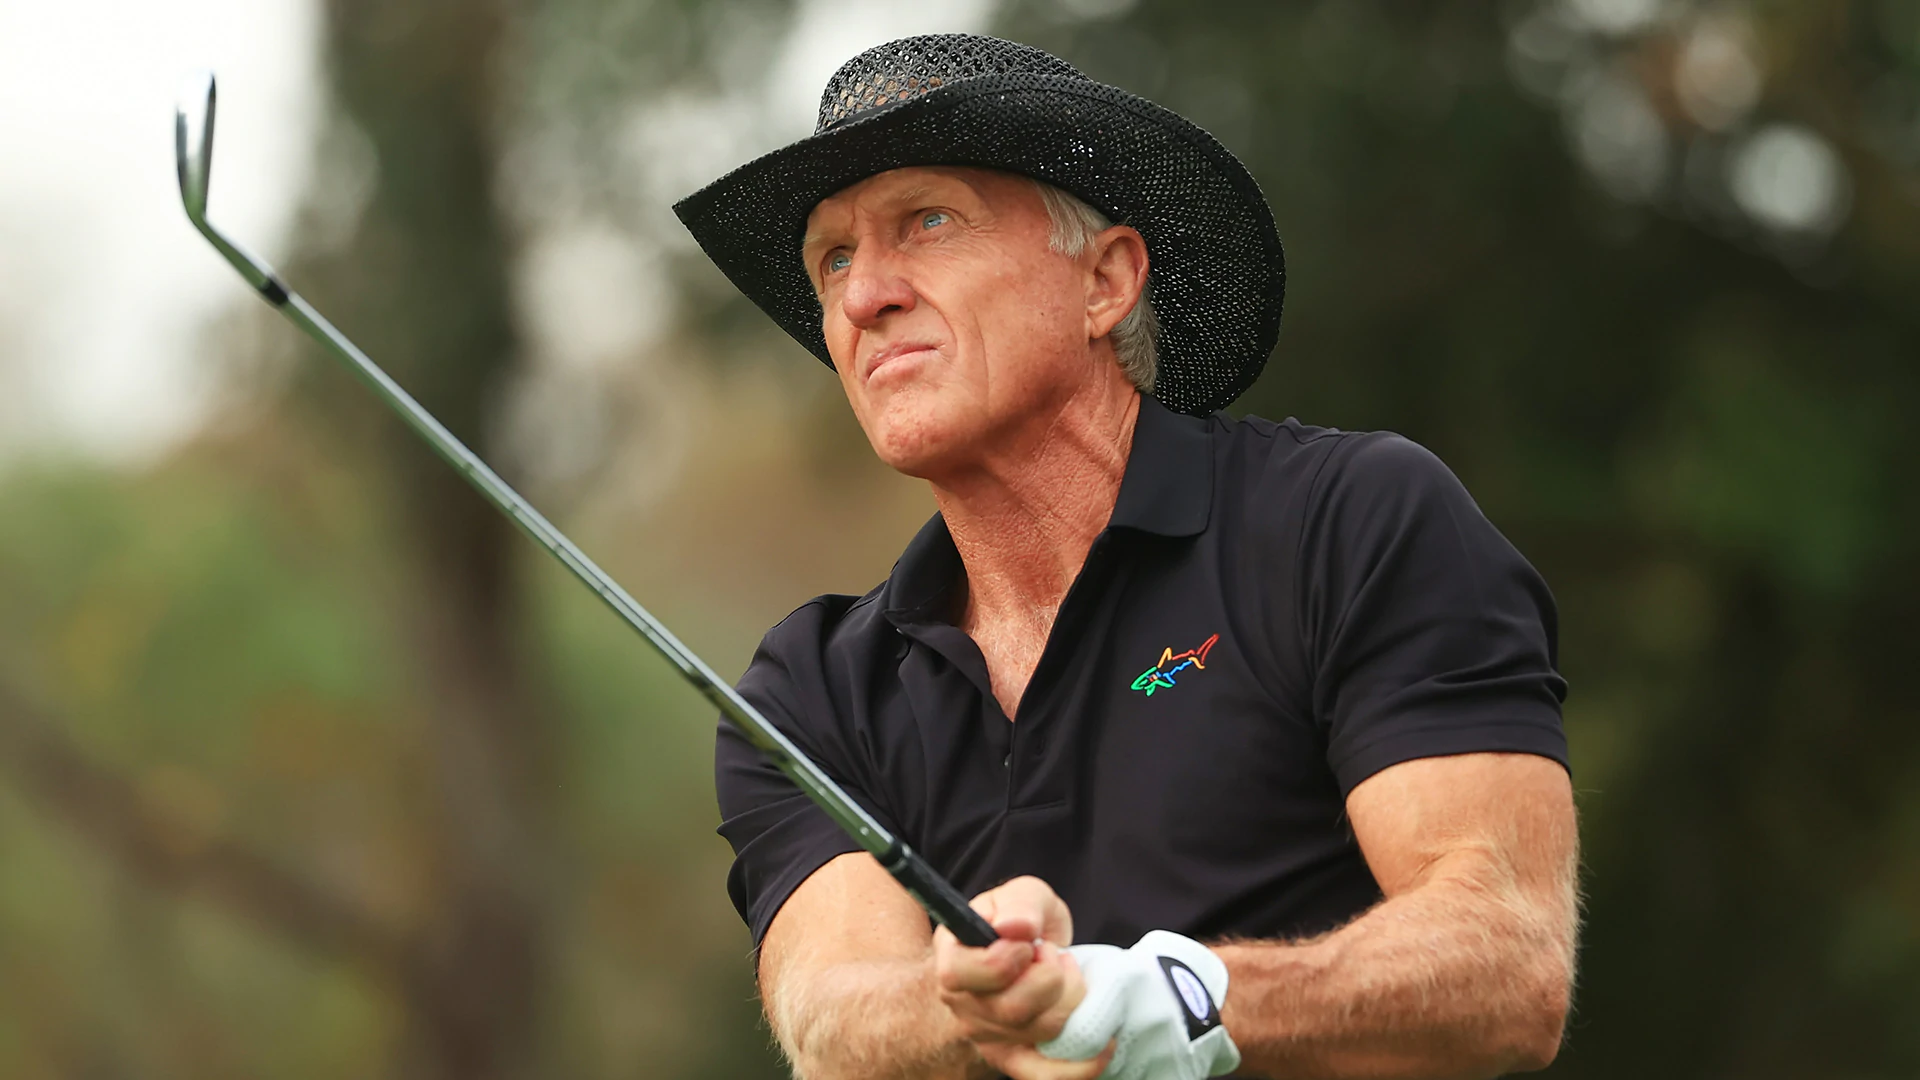 Greg Norman reveals he’s in hospital with COVID-19 symptoms